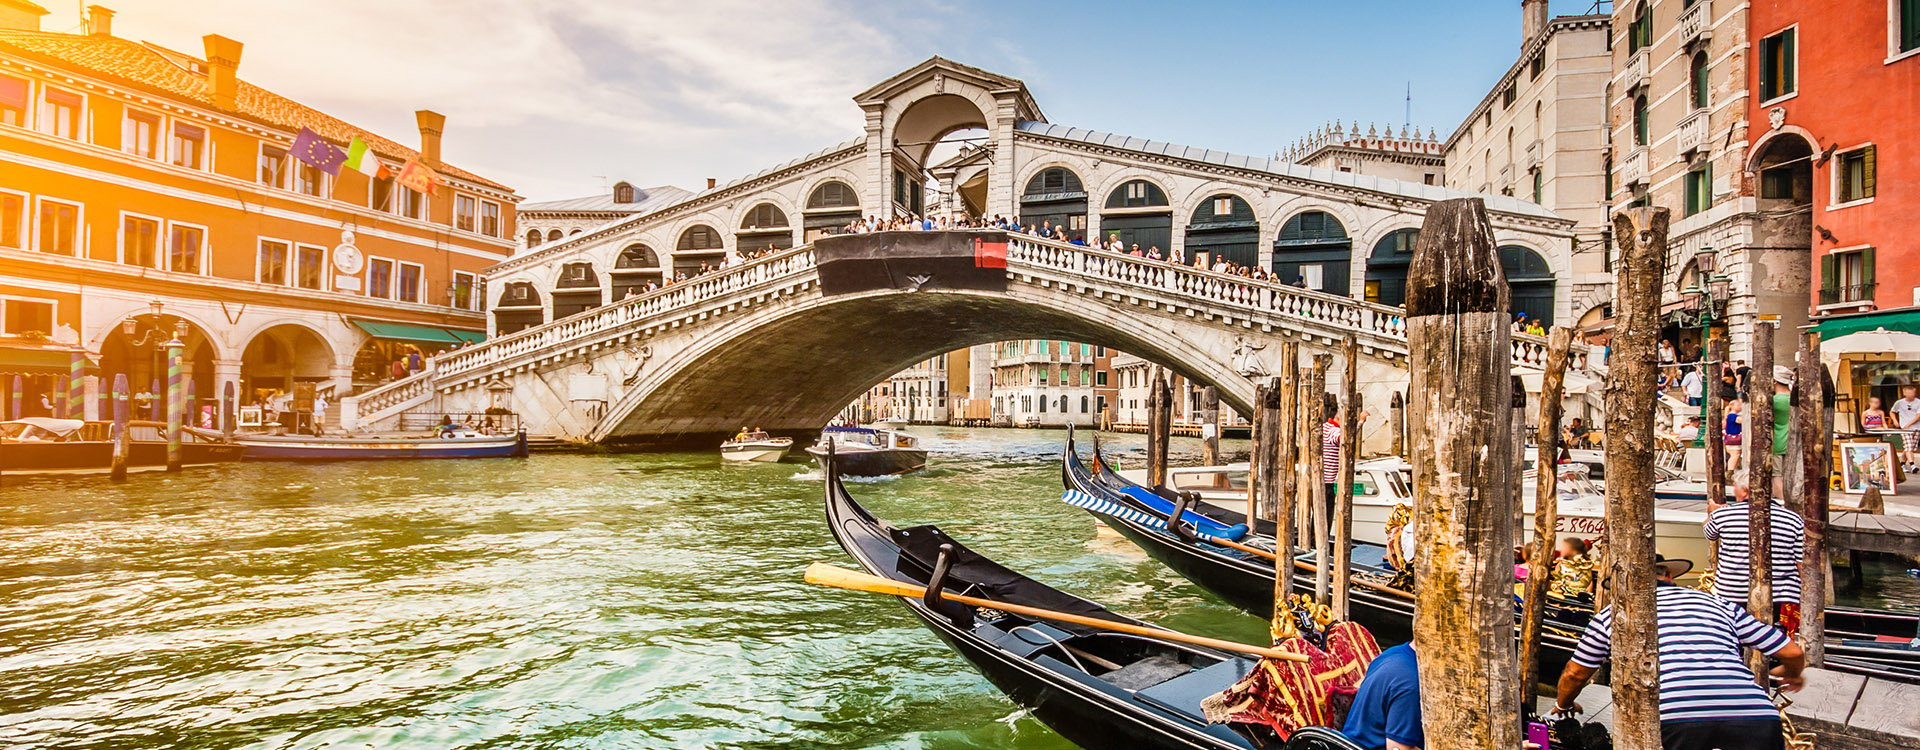 Panoramic view of famous Canal Grande from famous Rialto Bridge at sunset in Venice, Italy